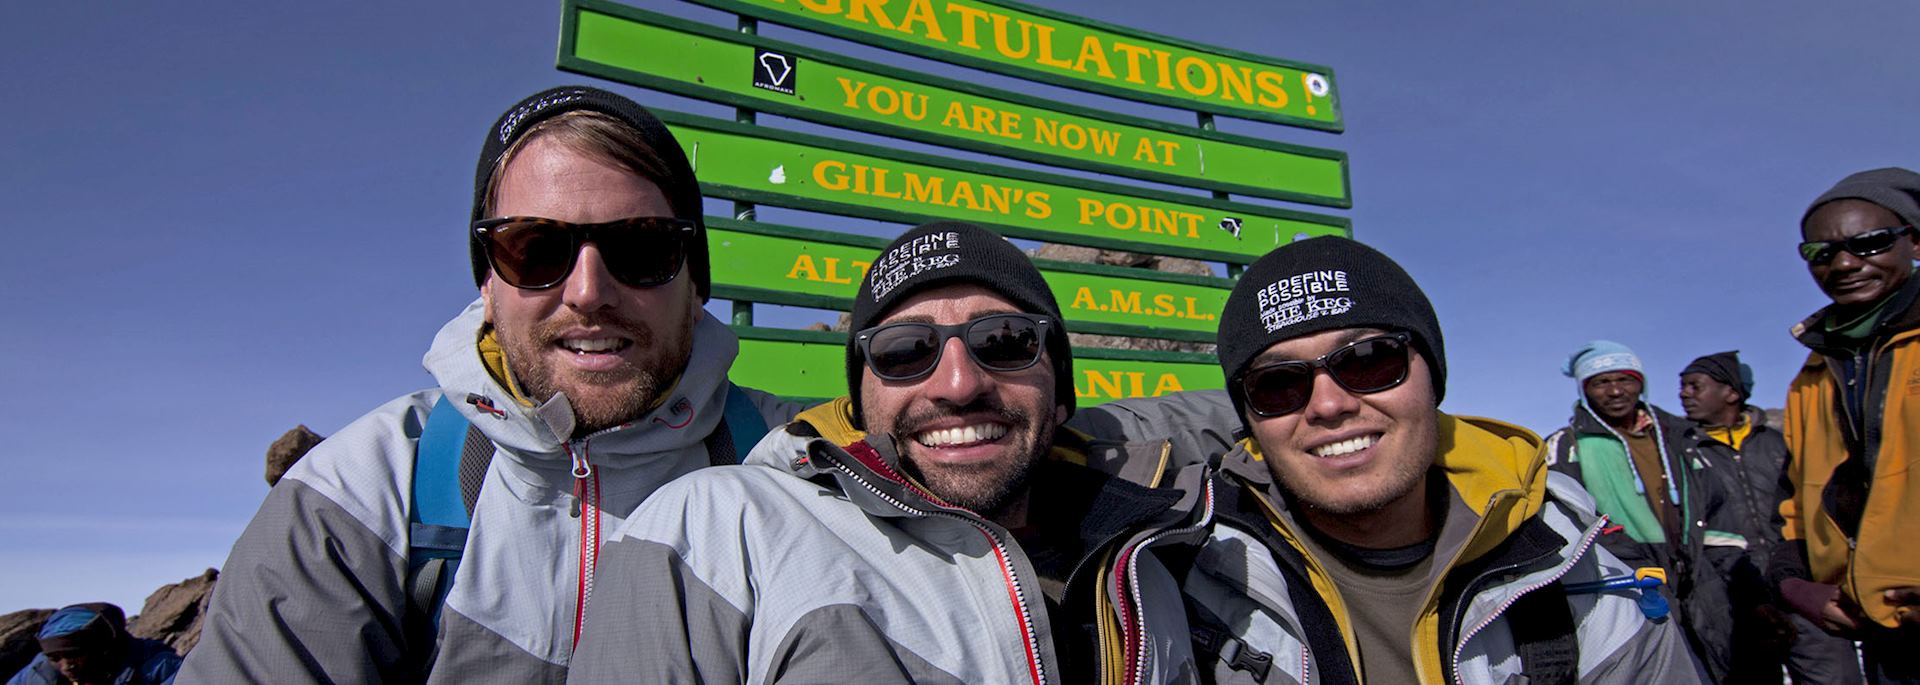 Spencer West (middle) celebrates reaching the top of Mount Kilimanjaro